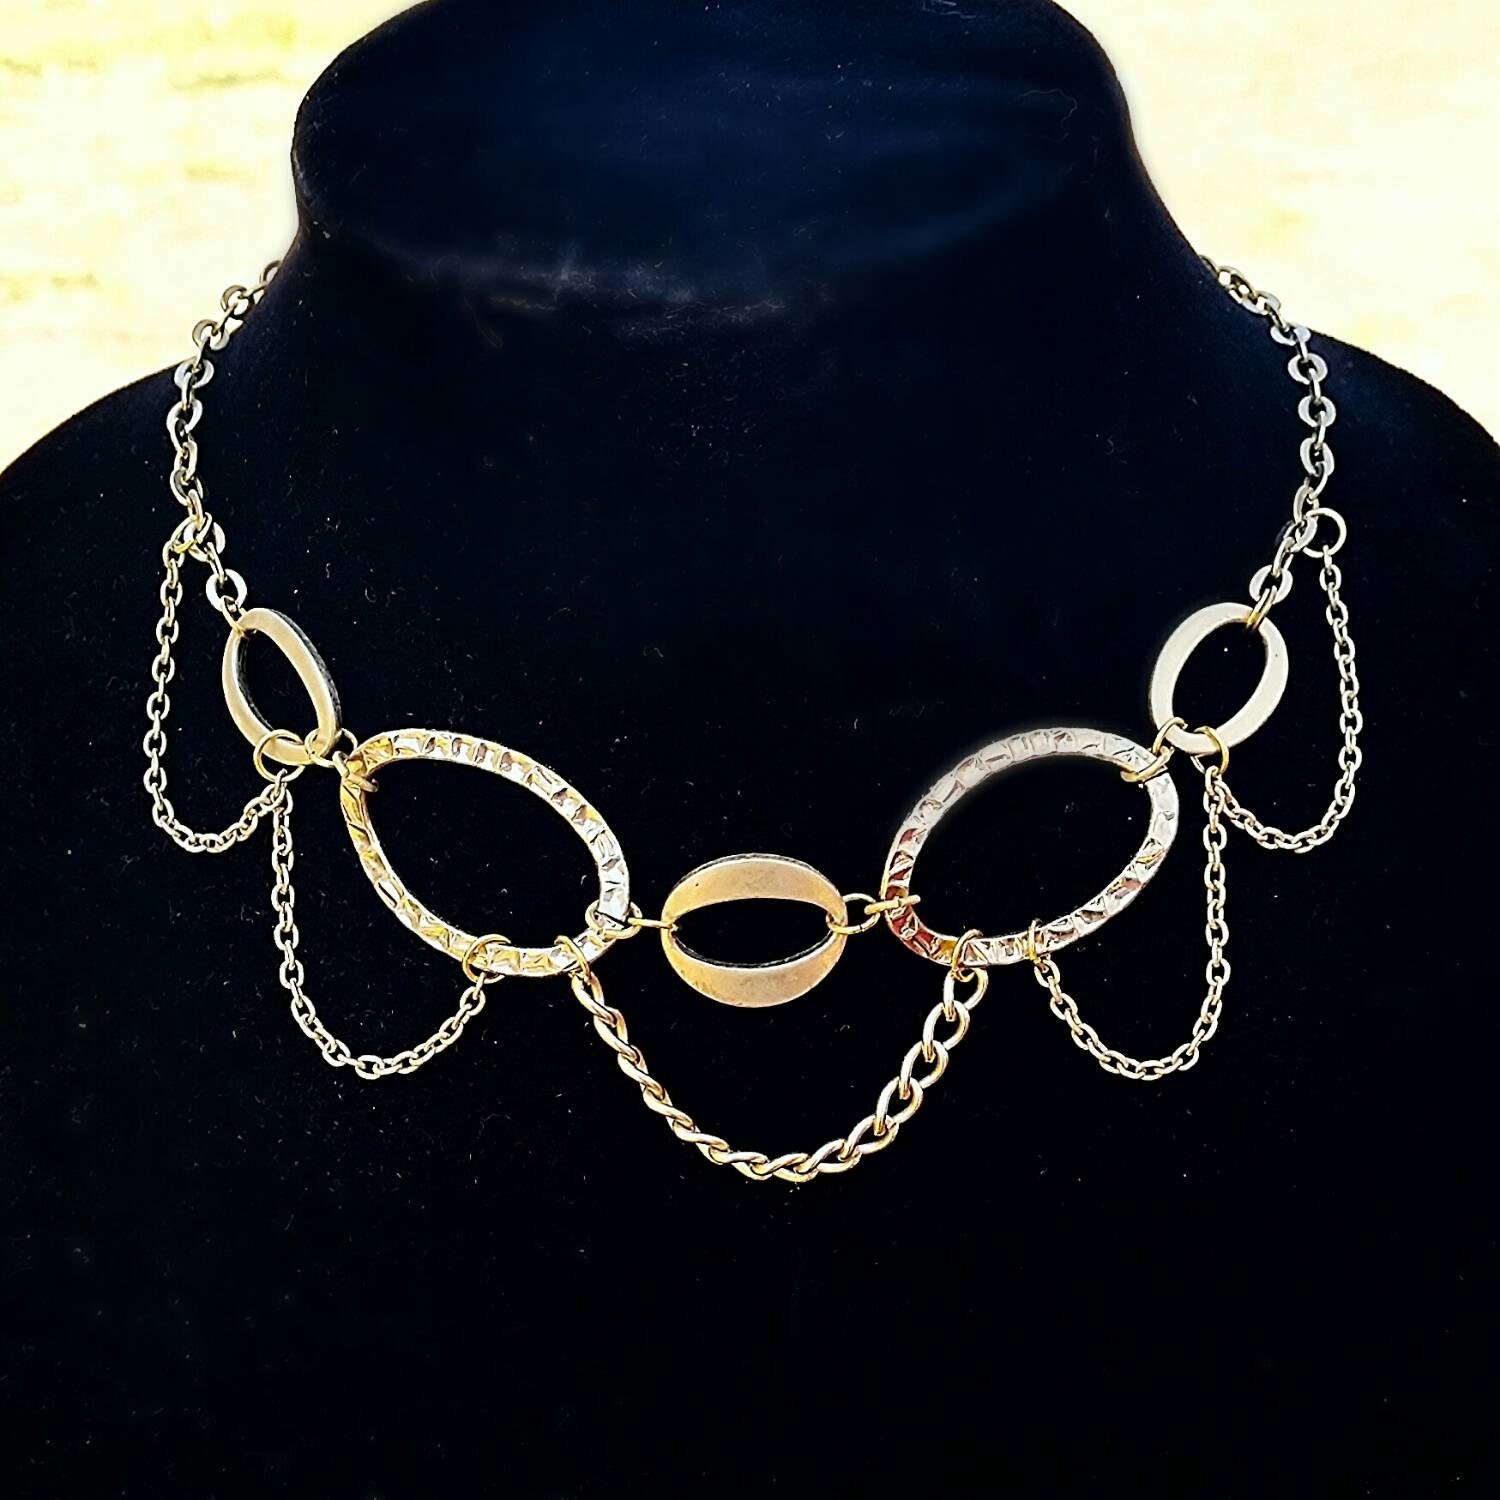 Hayley's Comet Collection Necklace 13 Gold Ovals Choker